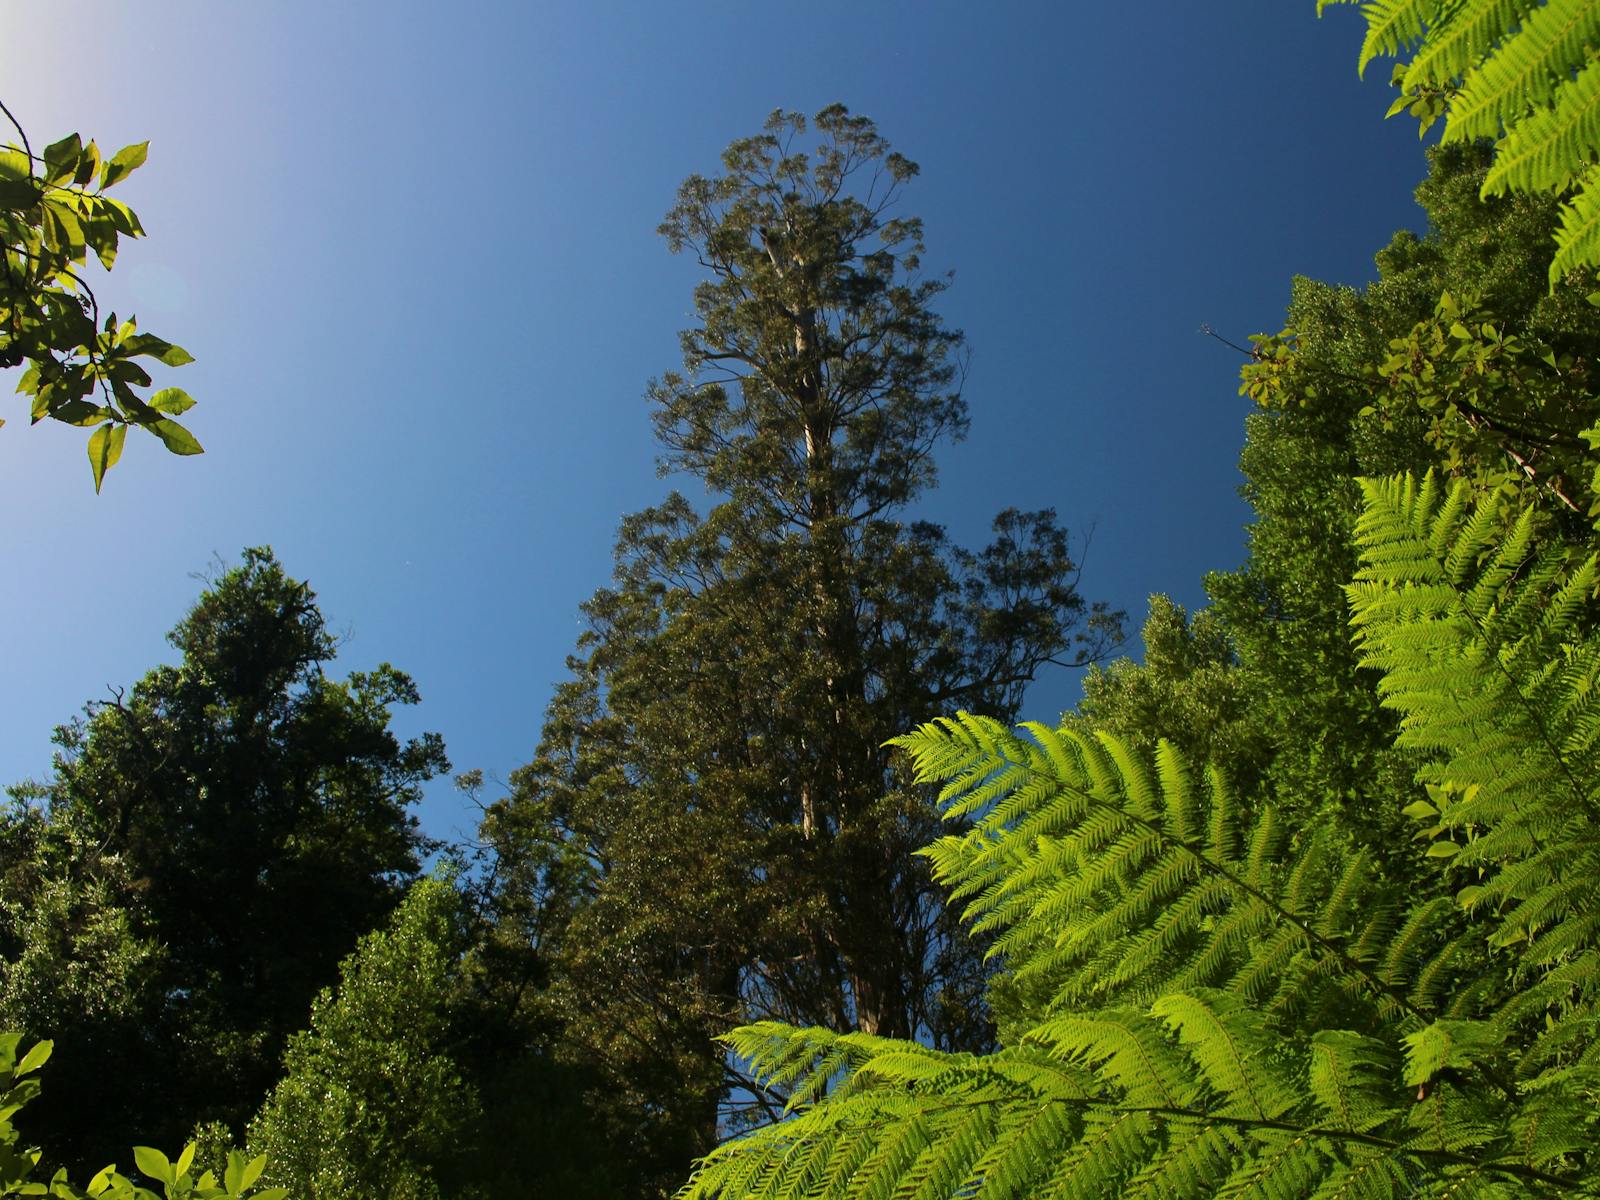 The top of the world's tallest flowering towers above in a bright blue sky